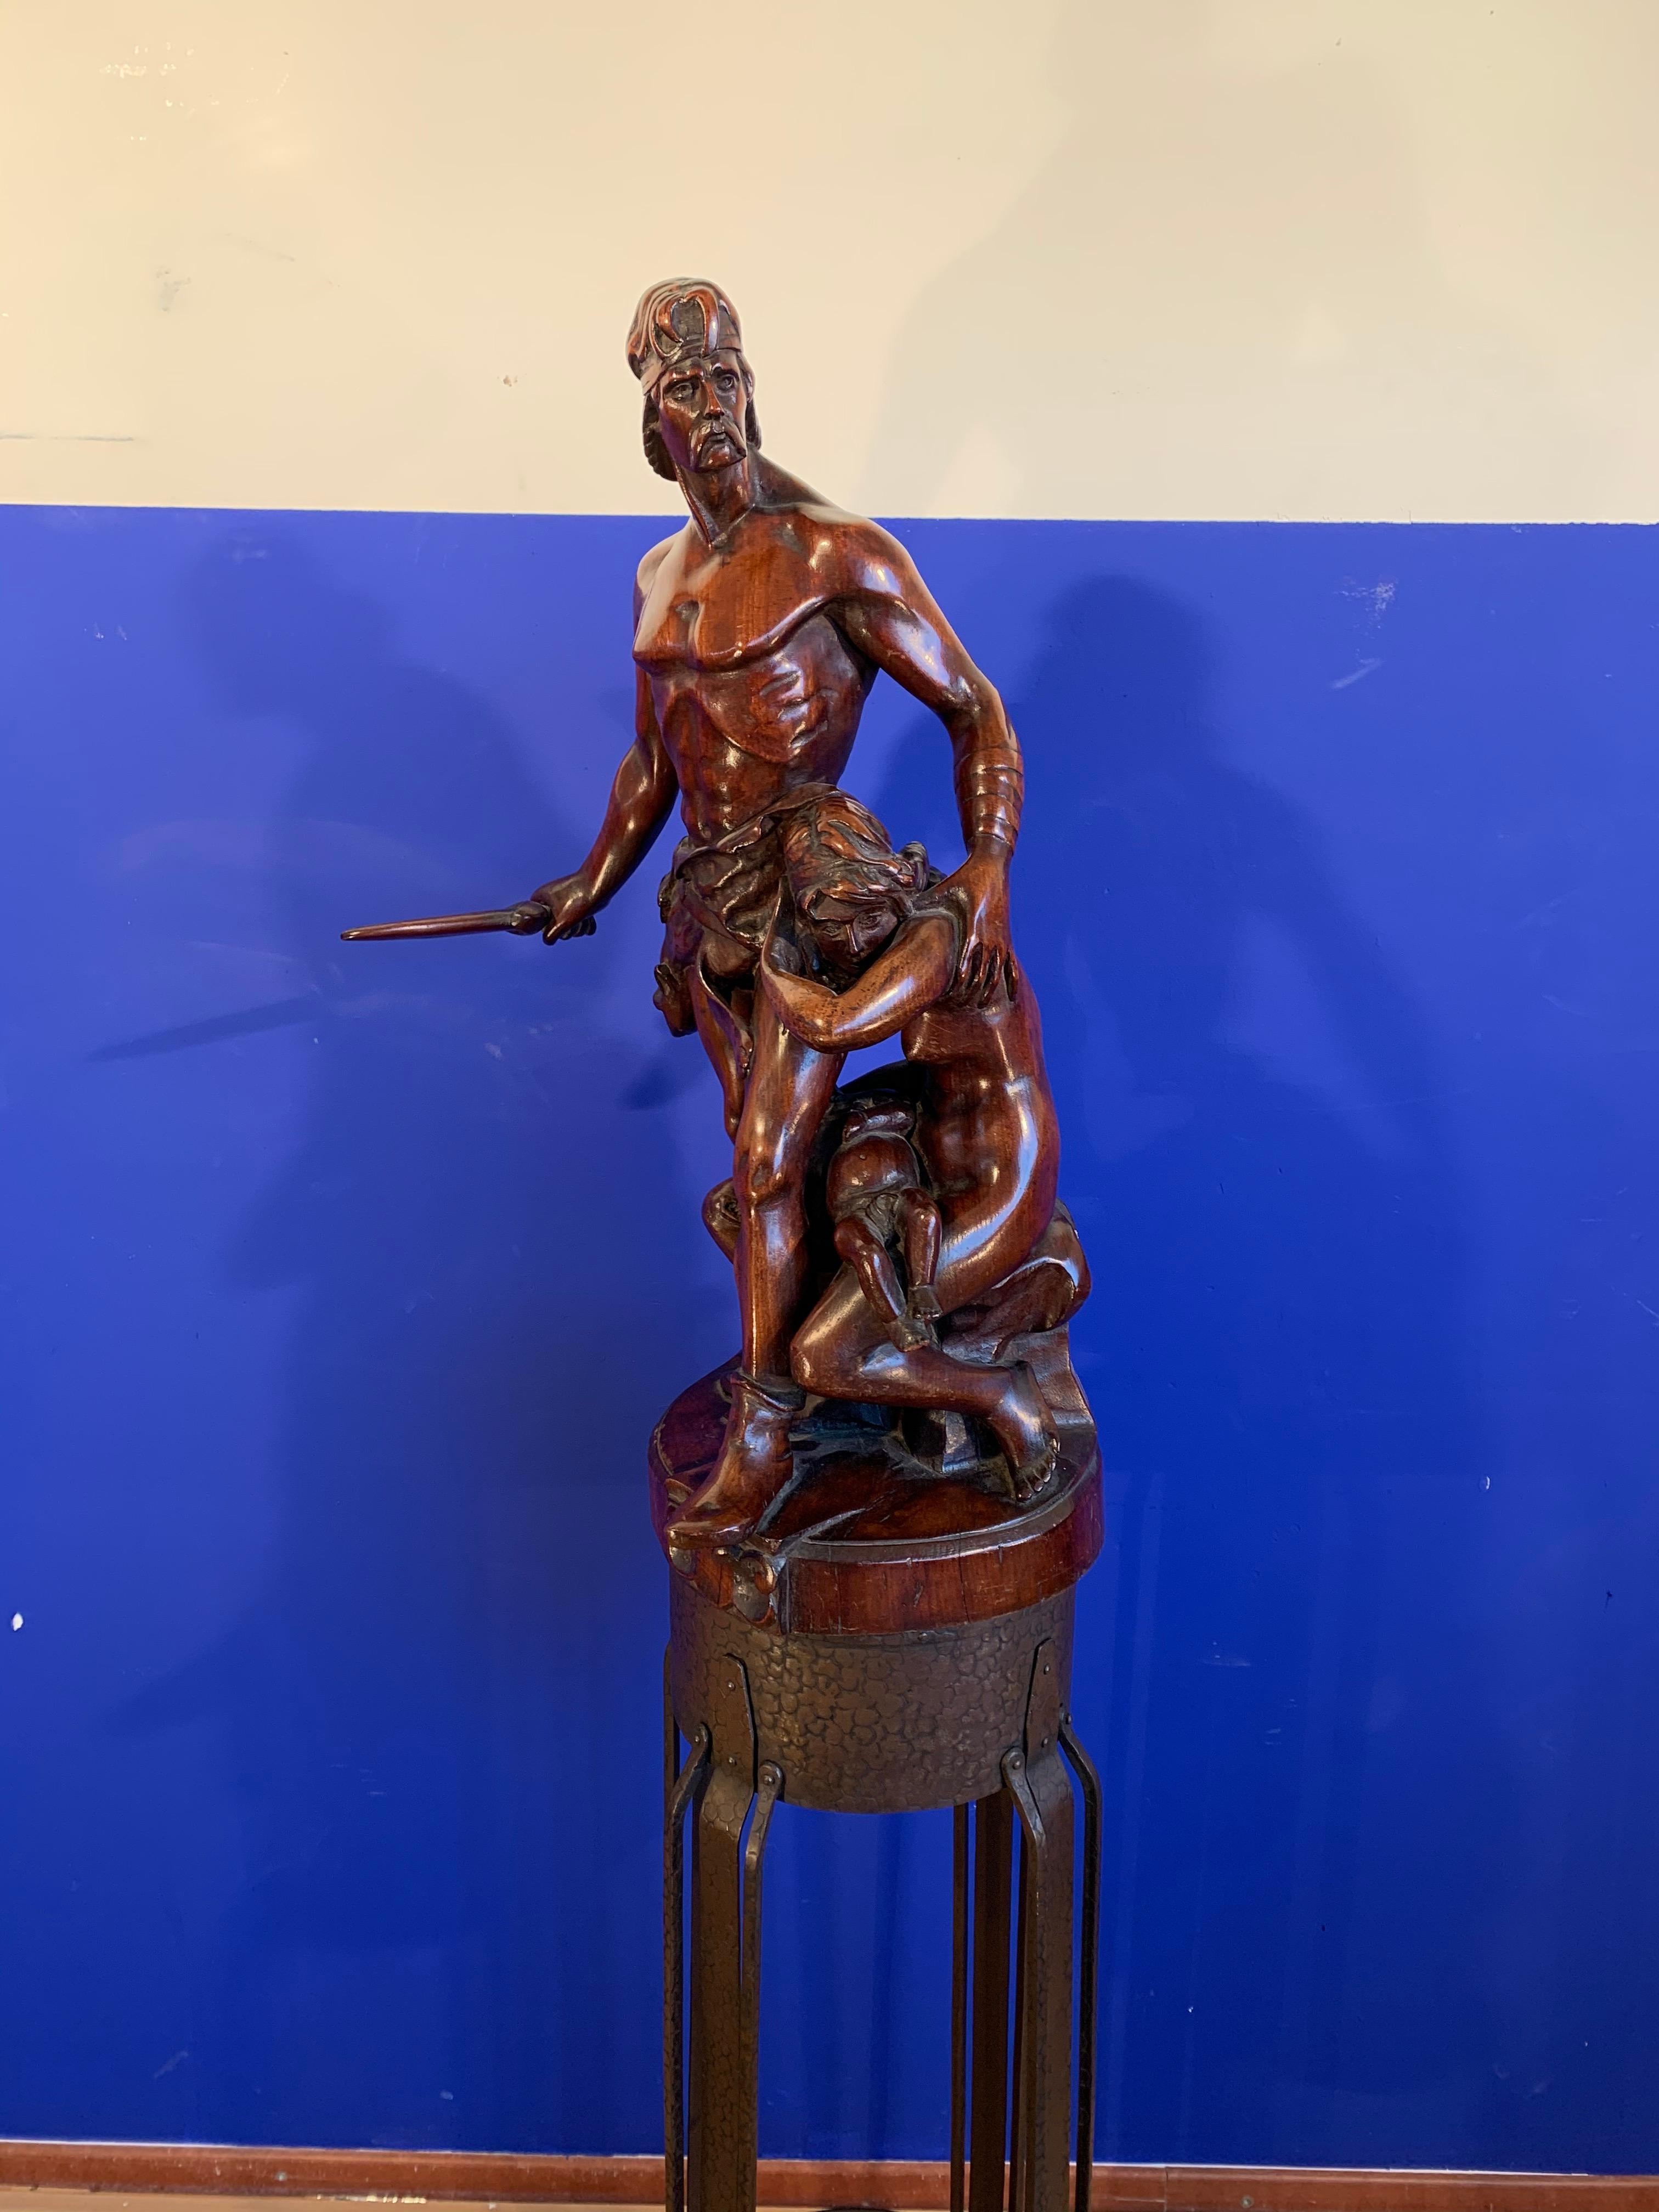 Hand-Carved One of a Kind Antique Carved Wood Group Statue Sculpture by Emile Boisseau For Sale